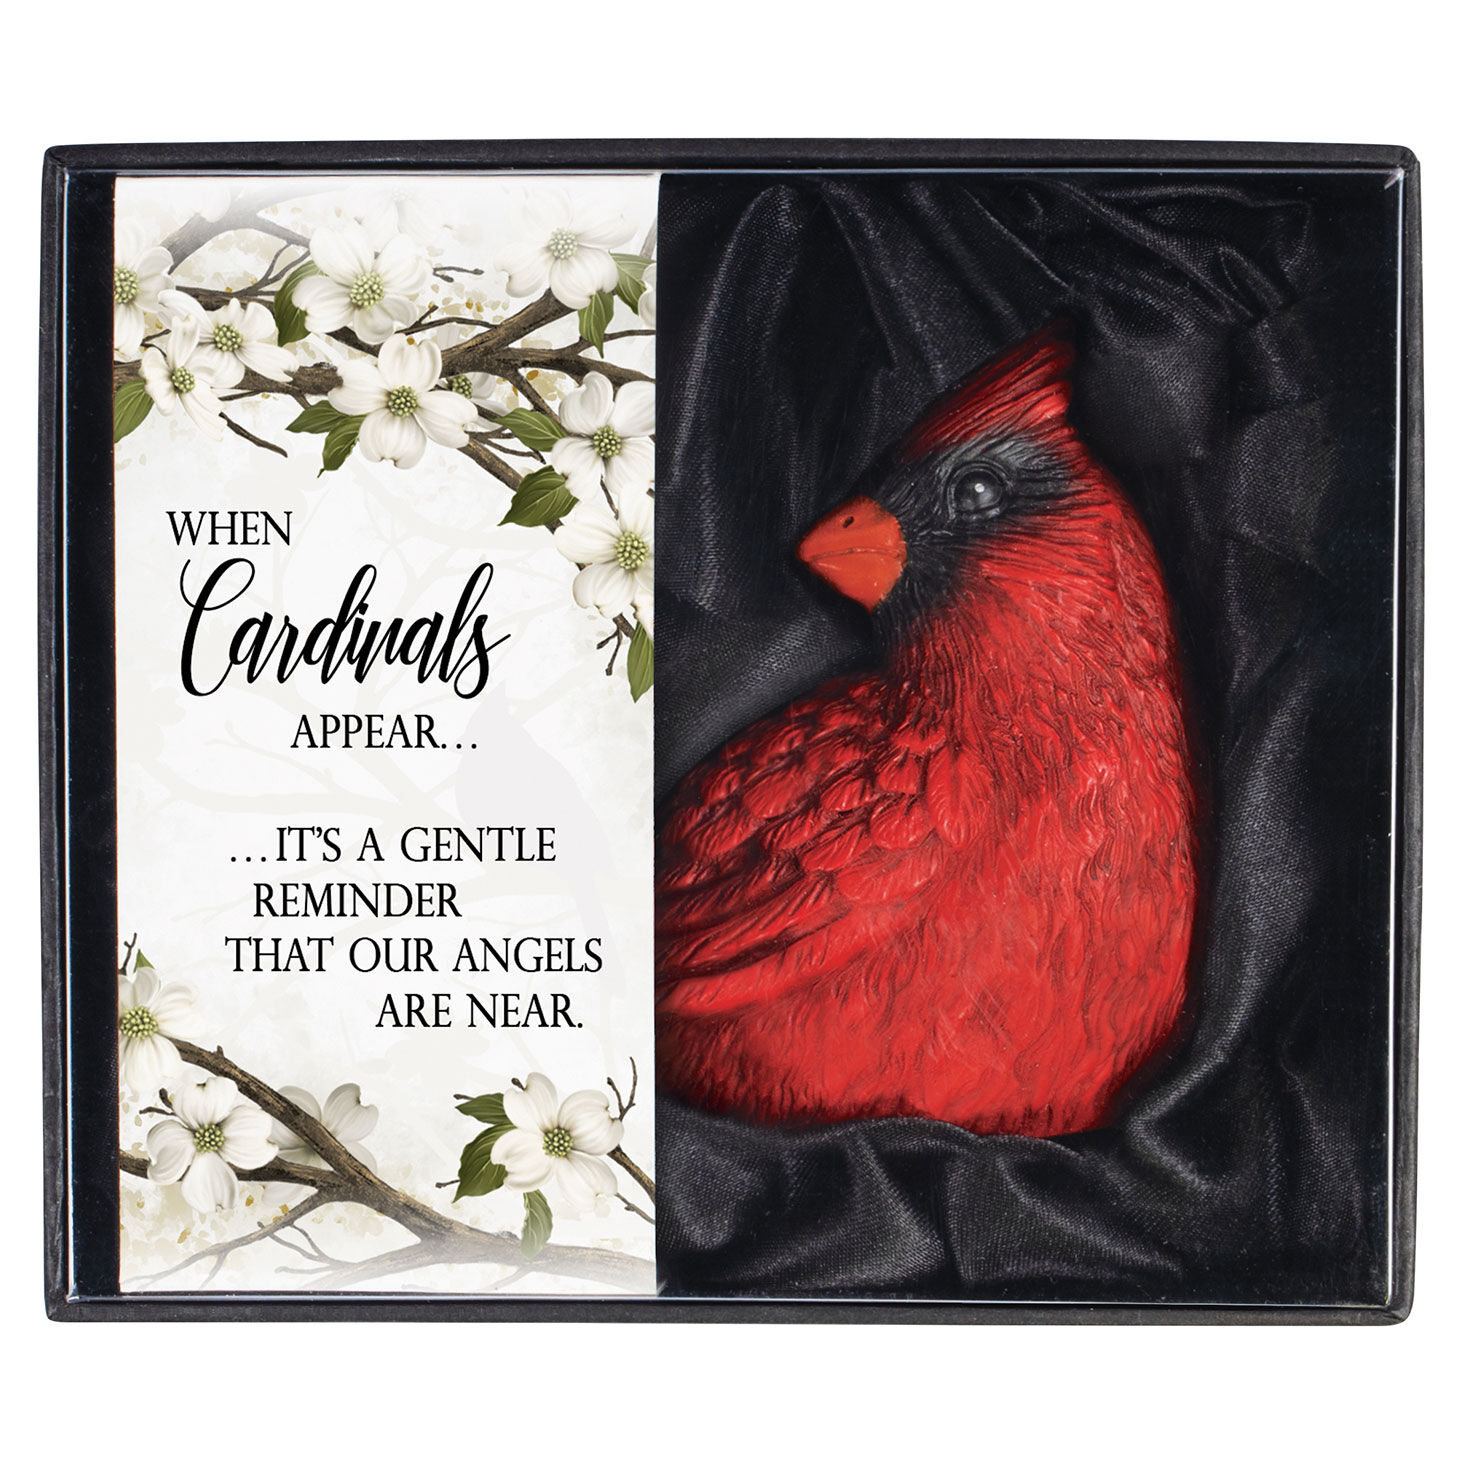 Carson When Cardinals Appear Gift Boxed Cardinal Figurine, 3.25" for only USD 19.99 | Hallmark